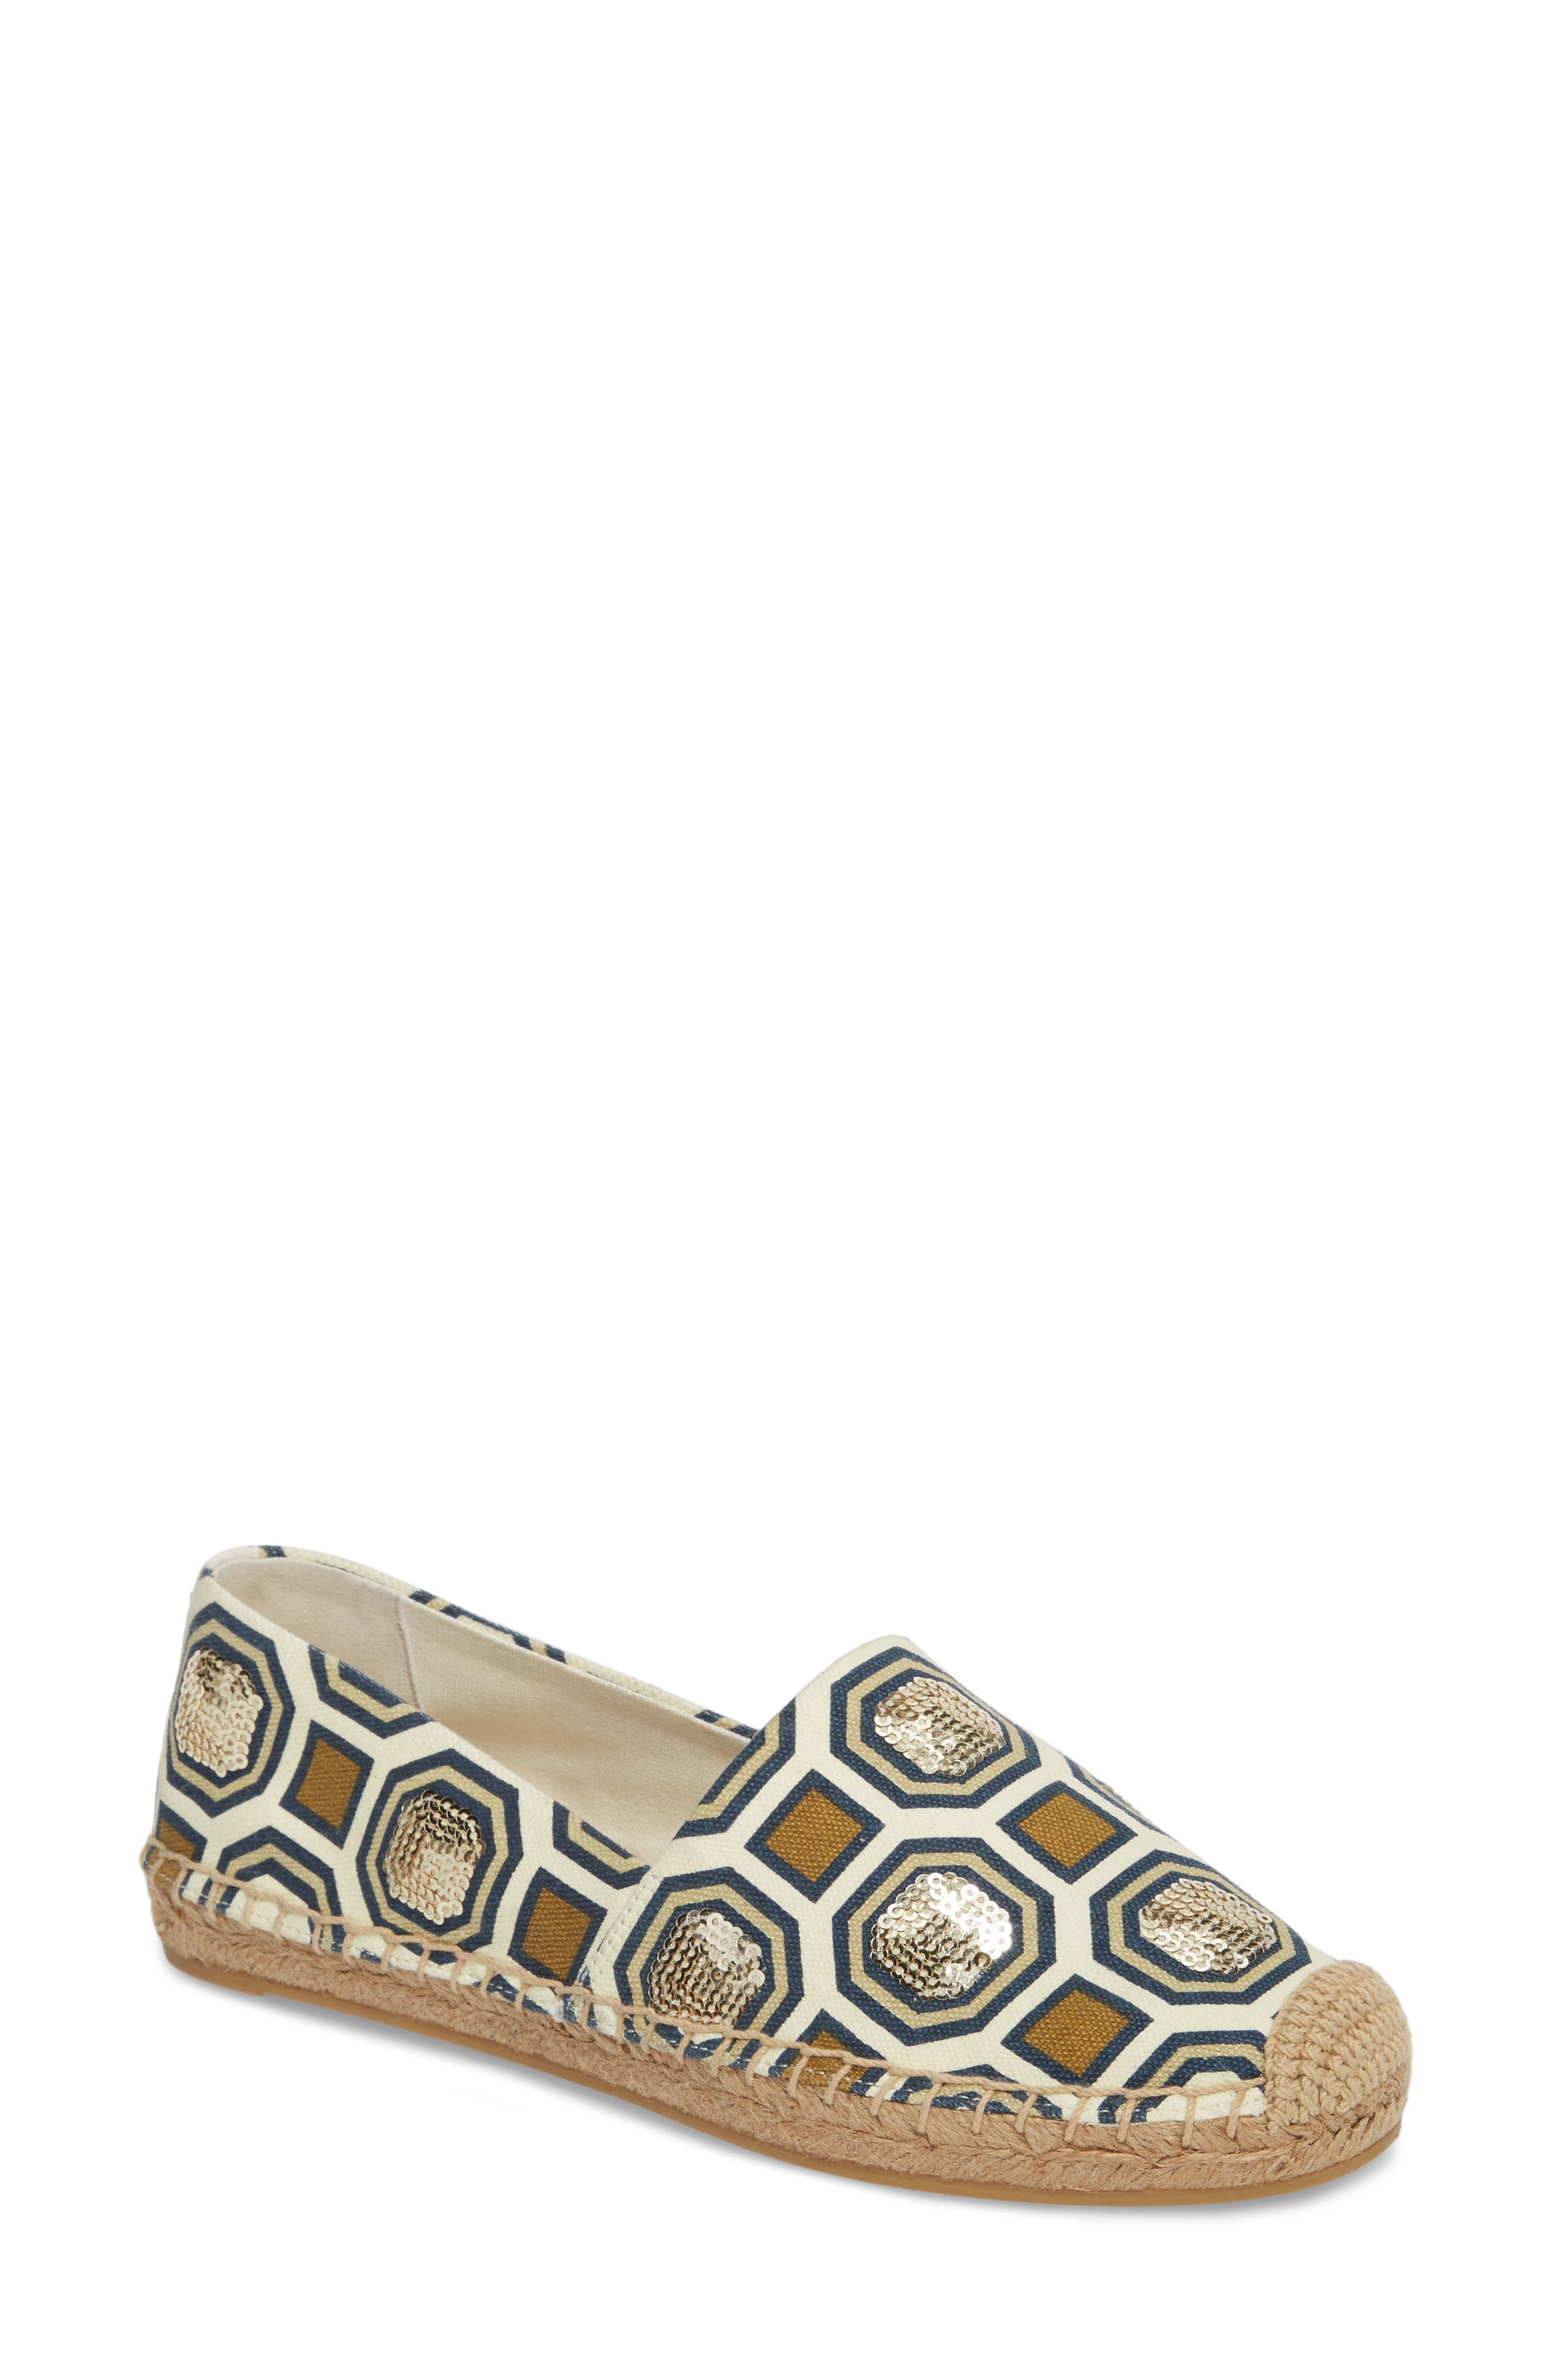 Tory Burch Cecily Sequin Embellished 